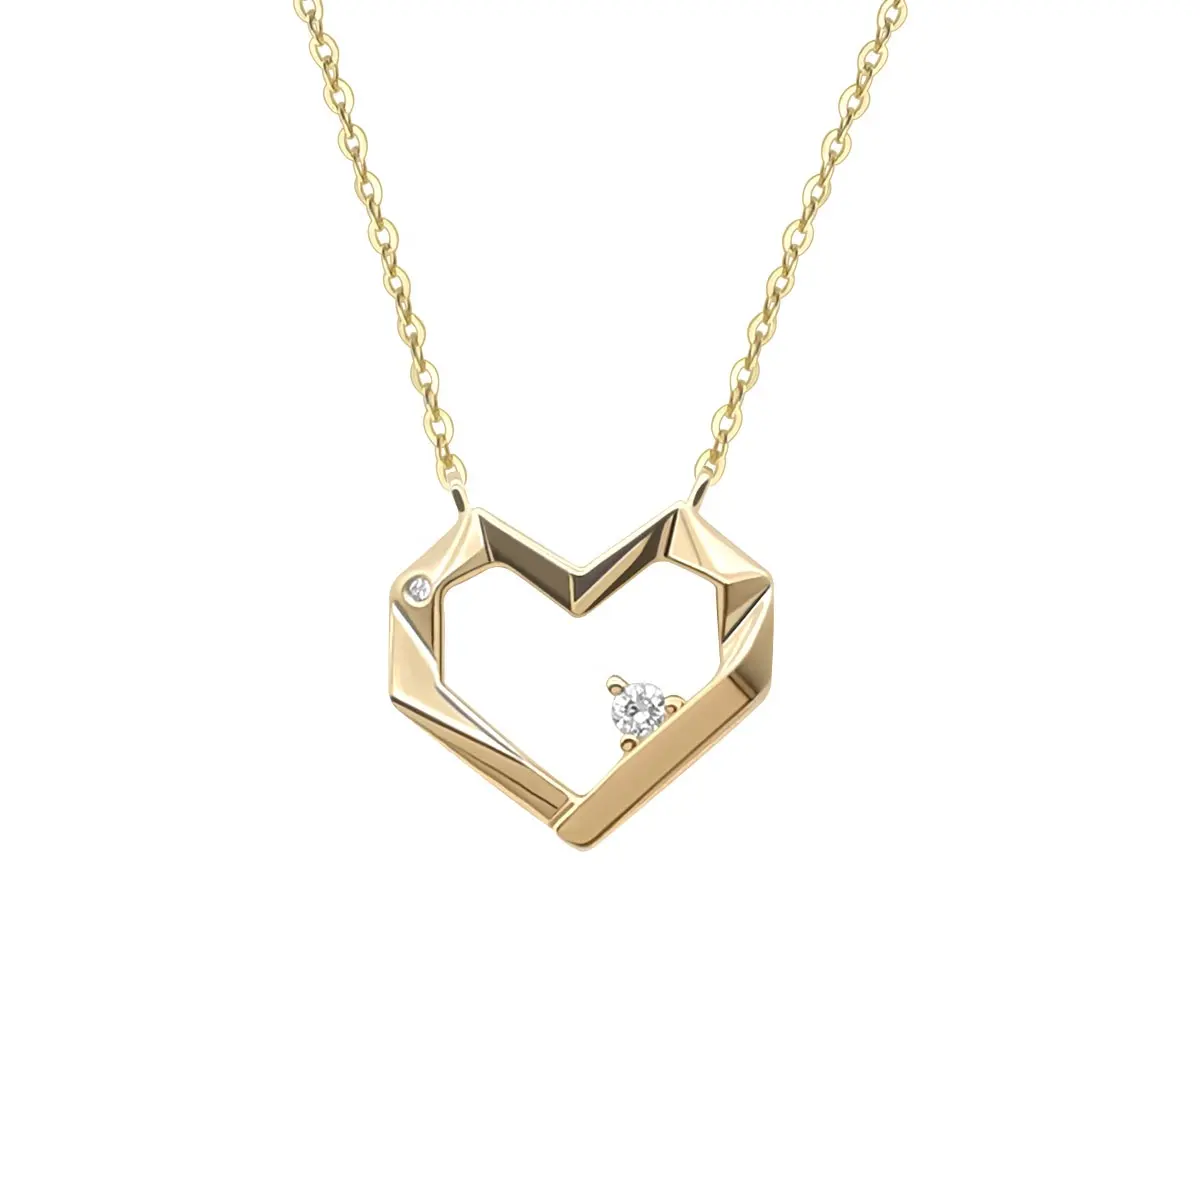 Simple Heart Charm Necklace 18K Yellow Gold Diamond Brilliant Cut 14K Gold Necklace Nice Gift for Valentine's Day